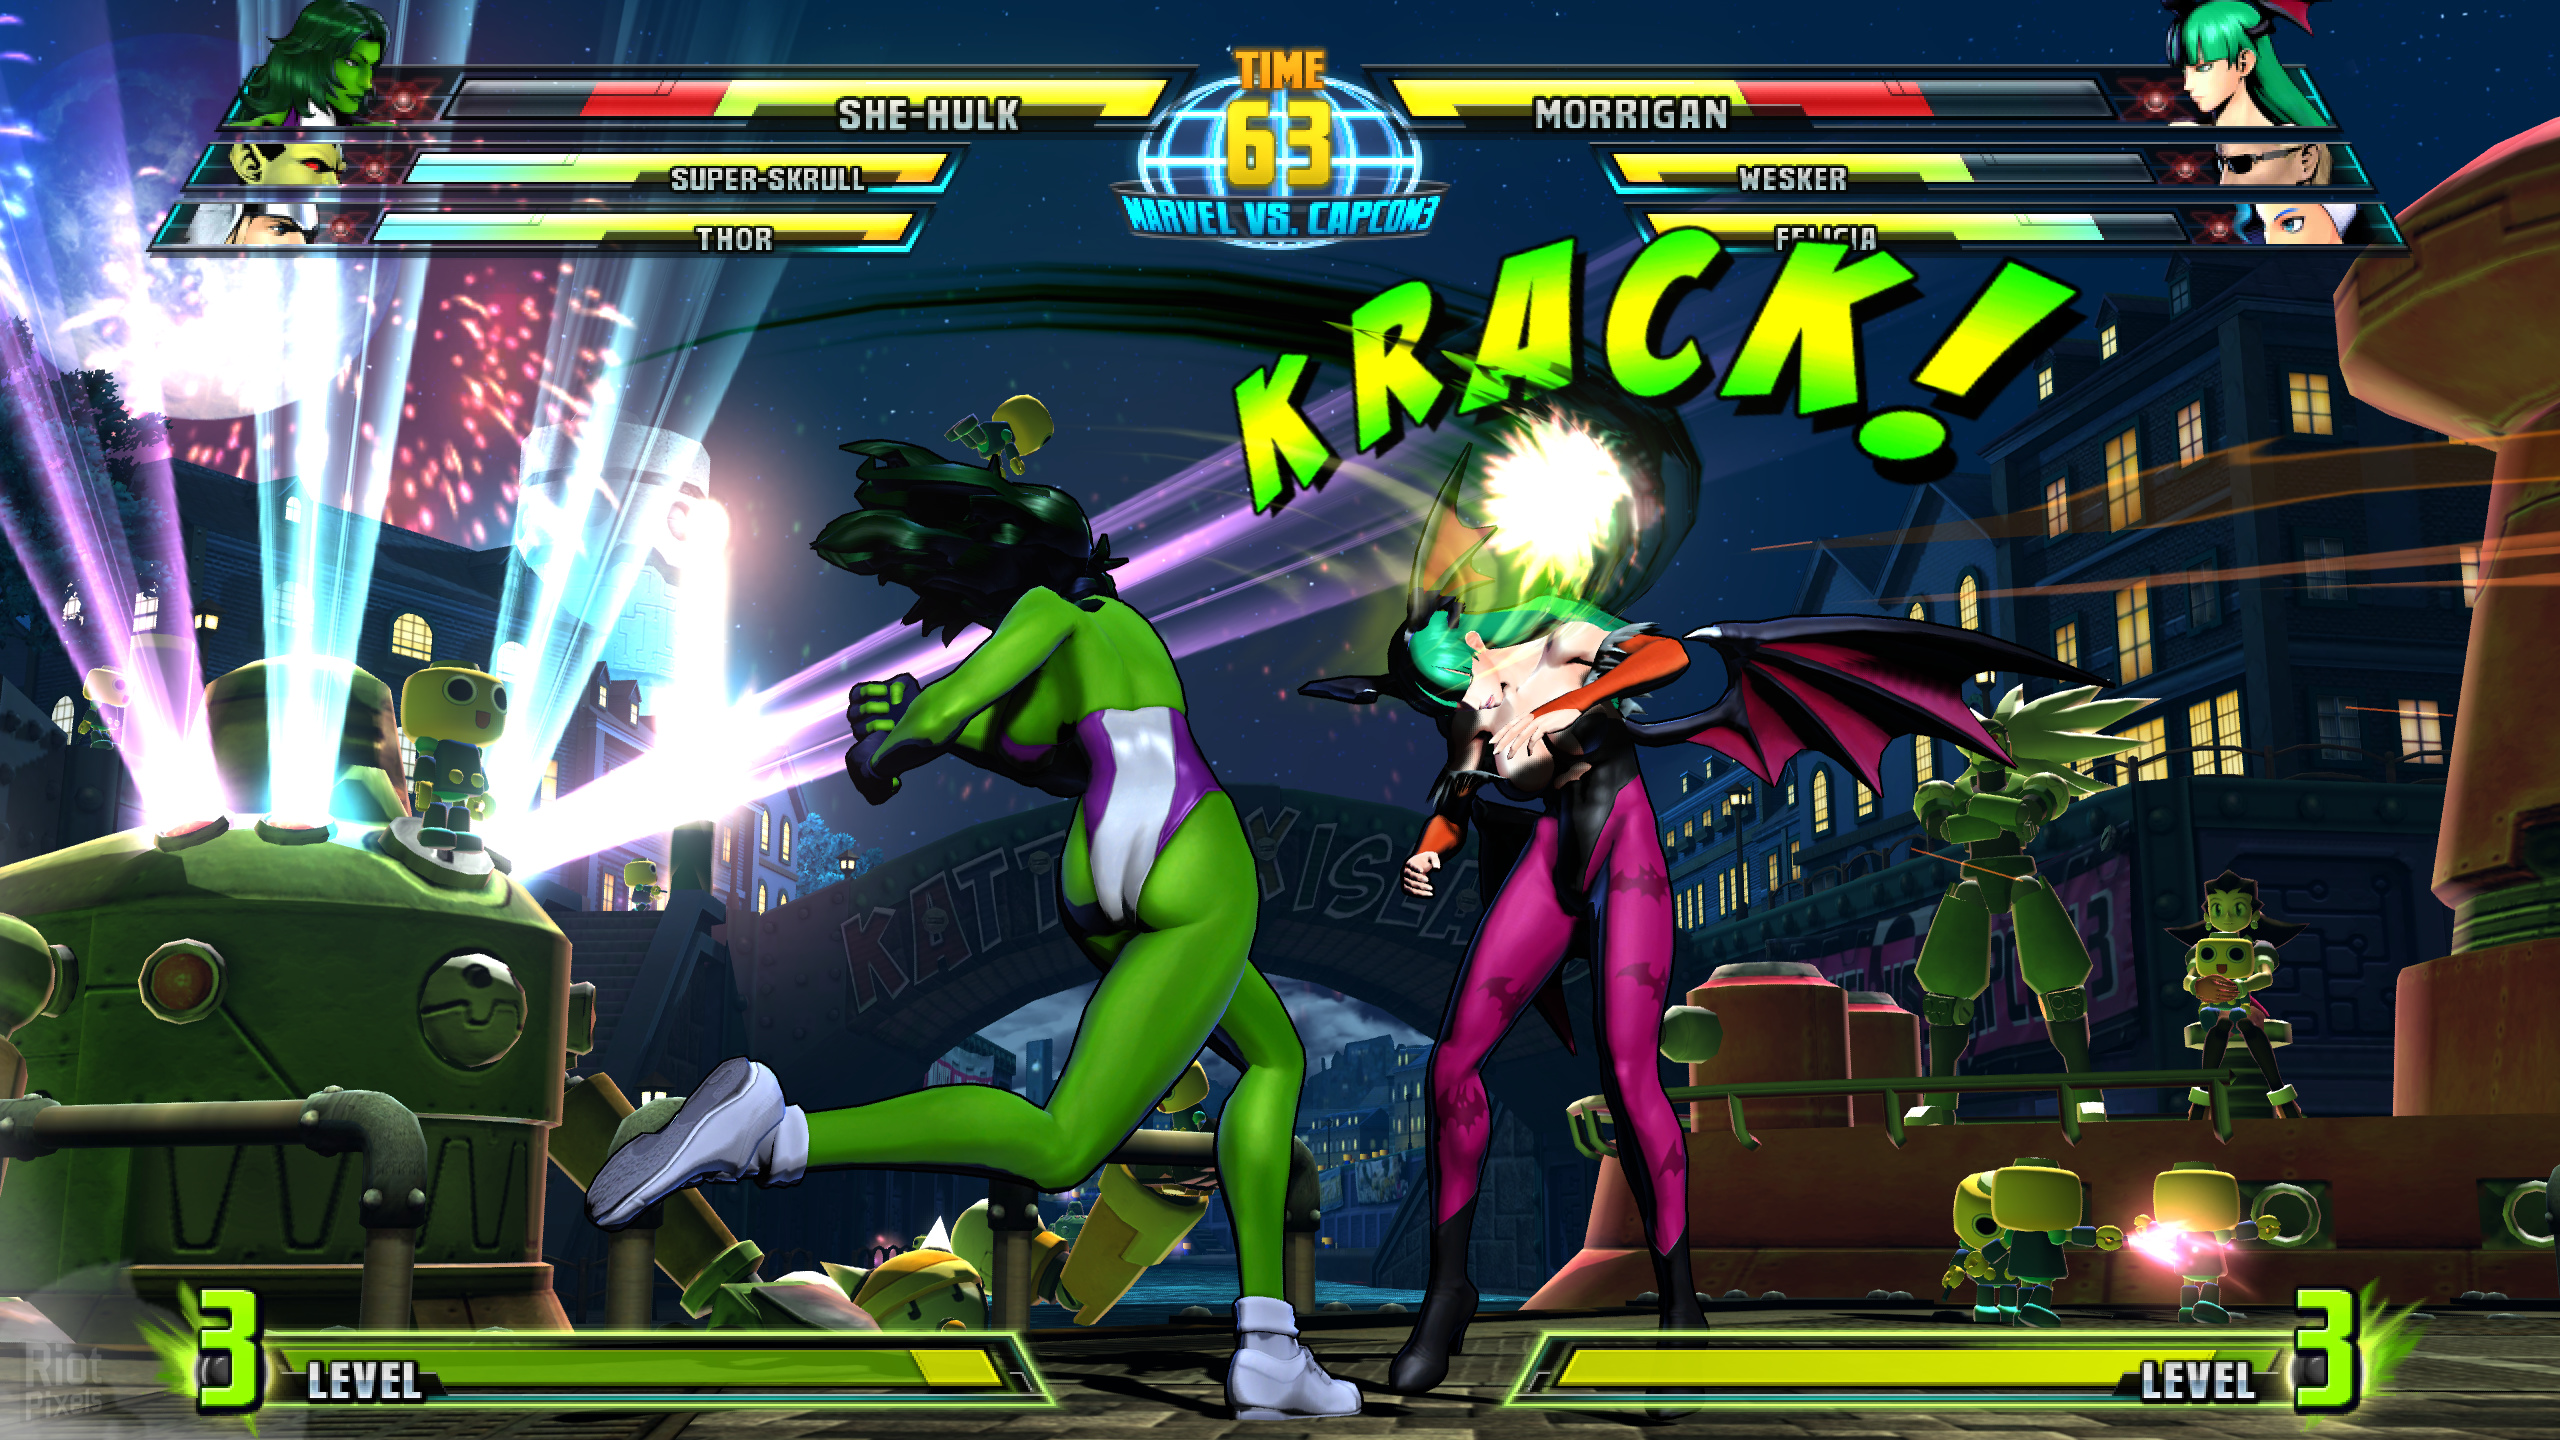 Marvel vs. Capcom 3: Fate of Two Worlds. 